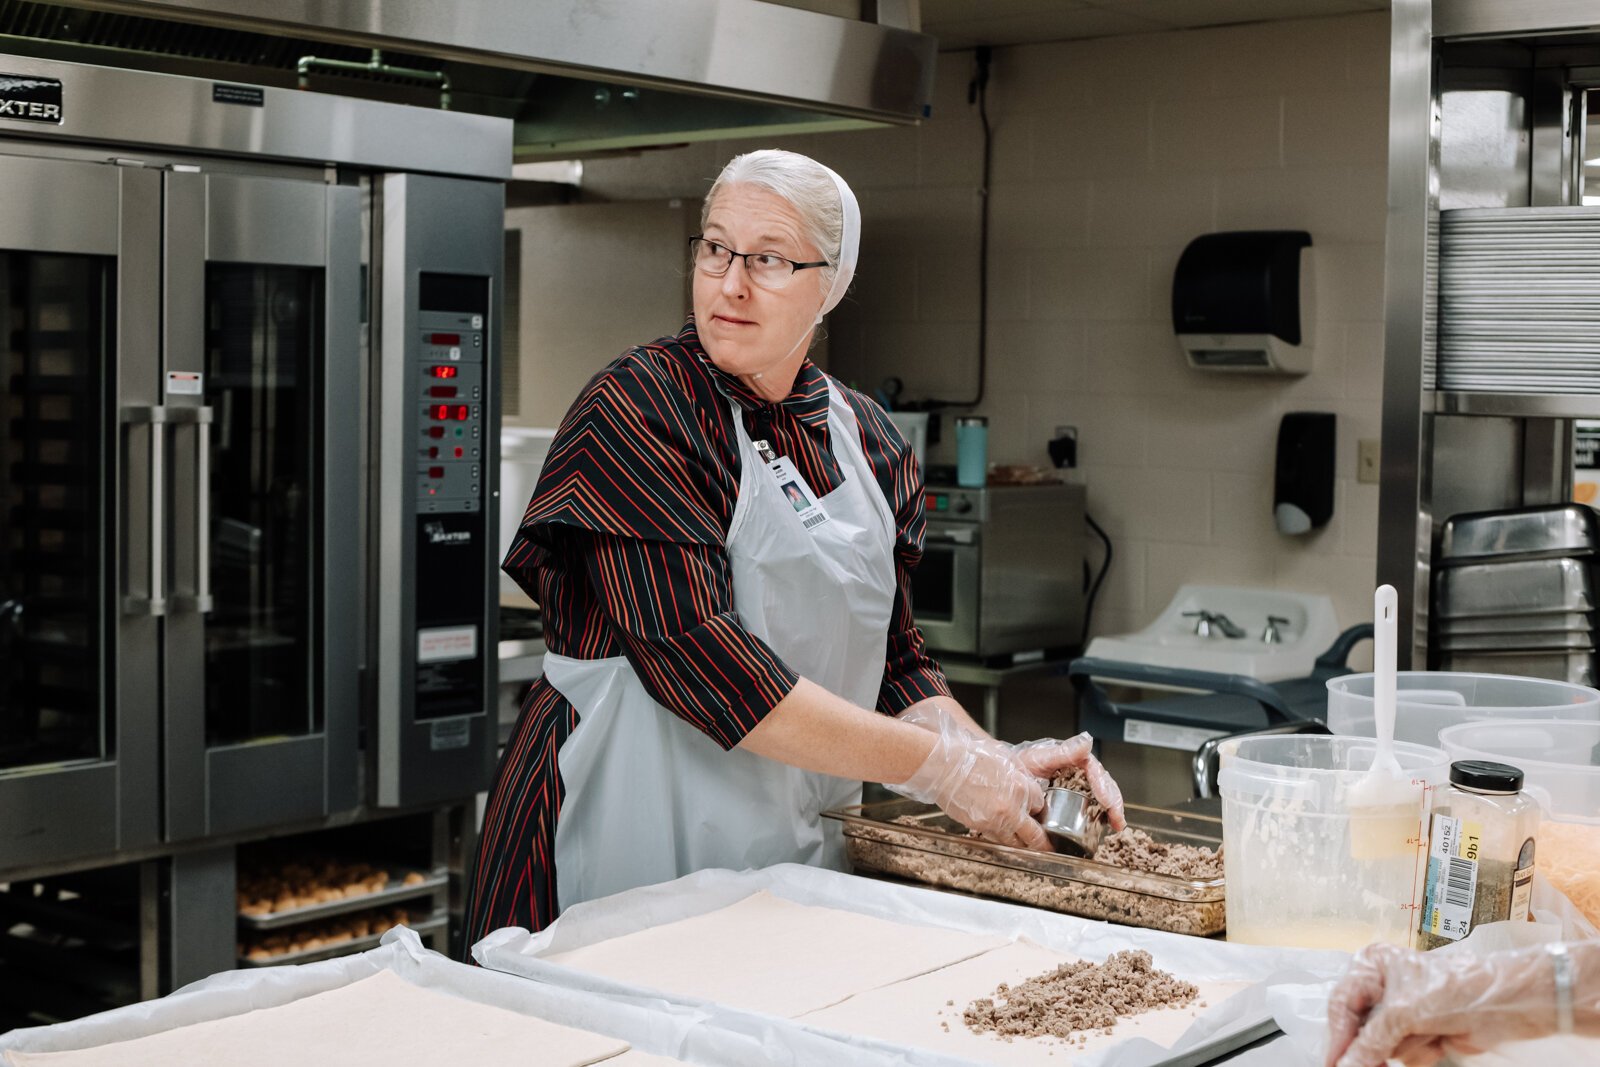 Landes's staff member Judith Brovont, left, prepares sausage bread for lunch at Manchester Junior-Senior High School, which features local pork from 4-H.